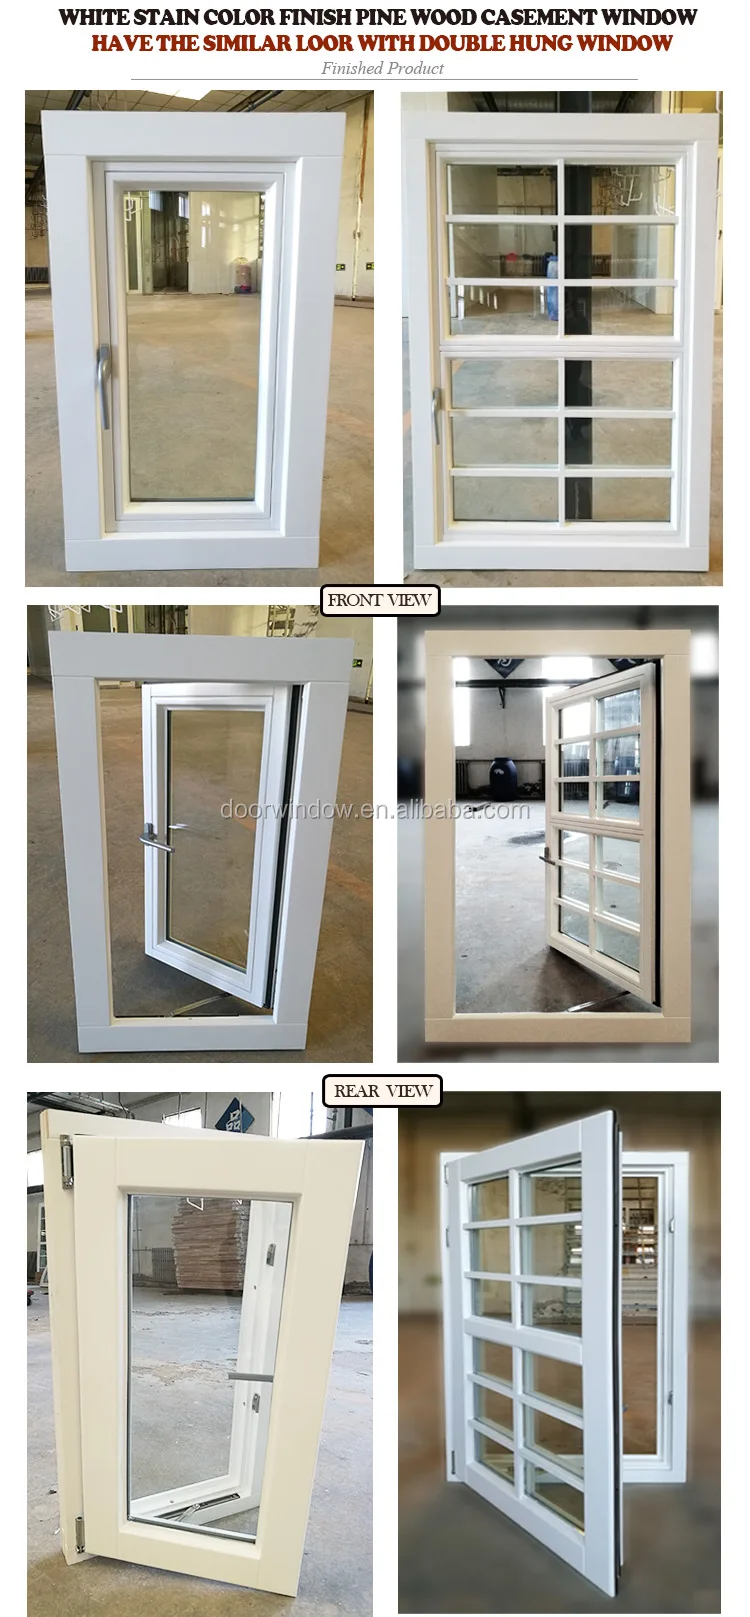 Window gril design glass and prices fans for casement windows